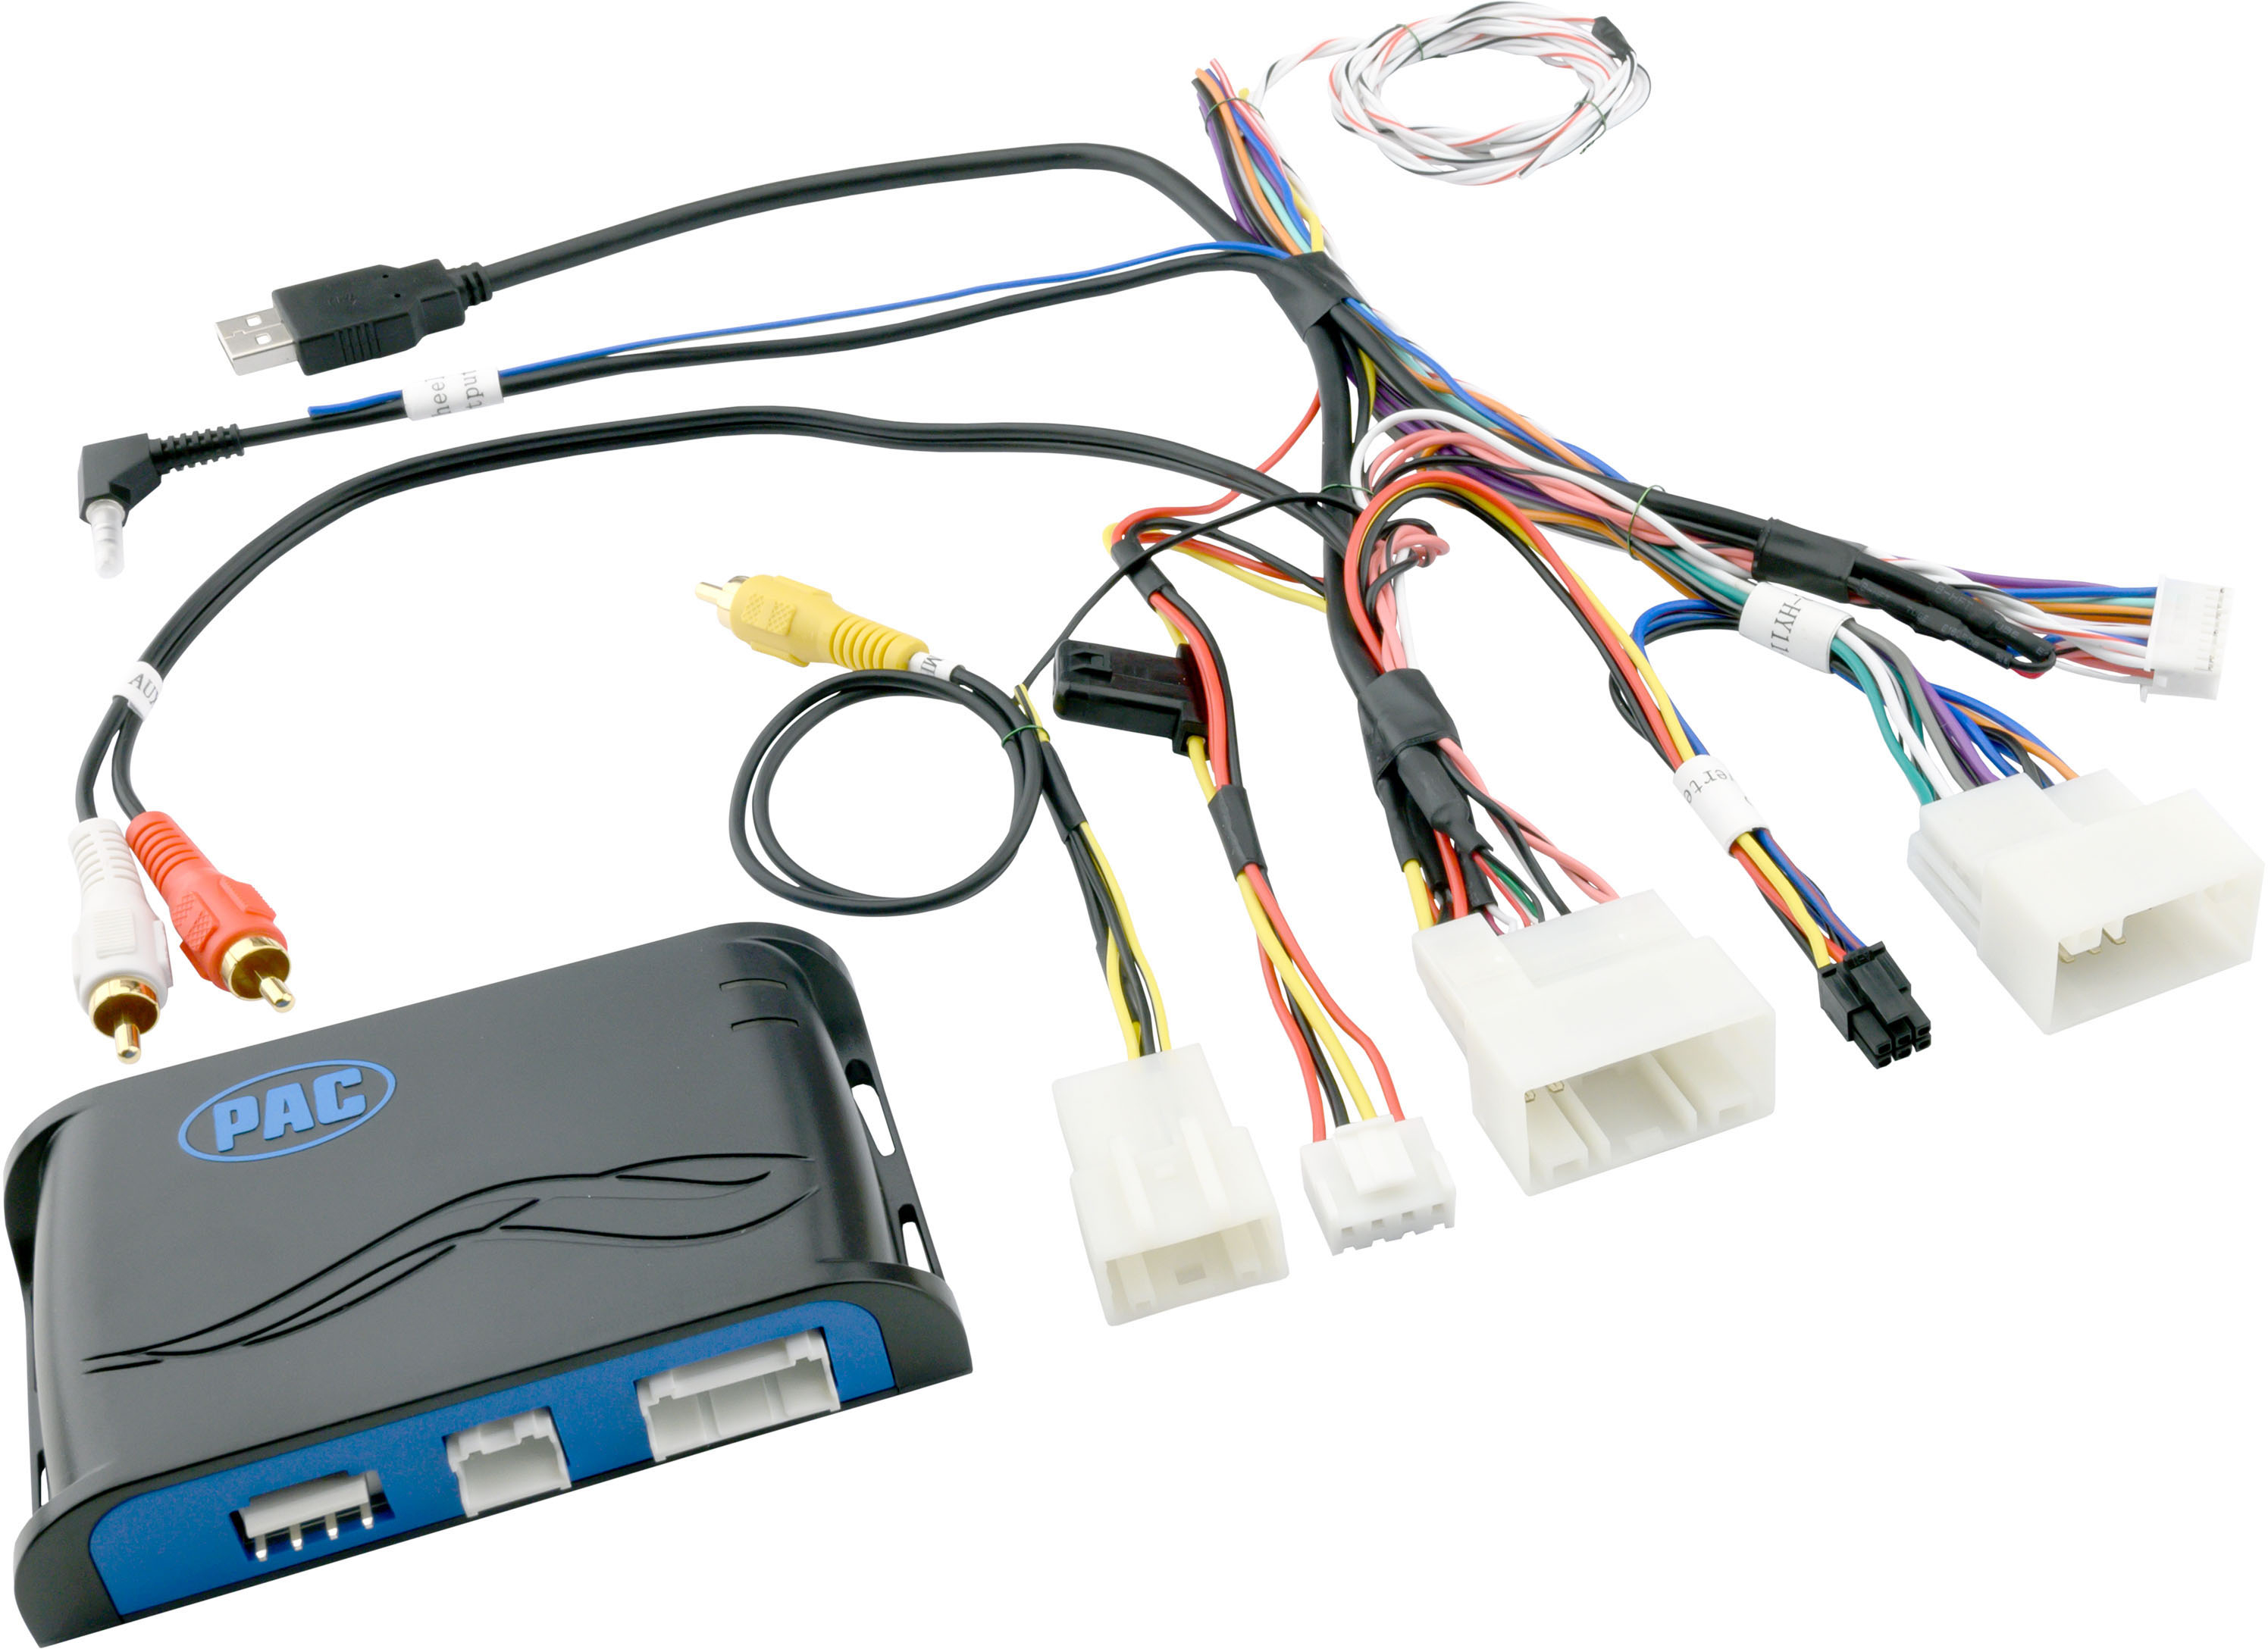 PAC Radio Replacement and Steering Wheel Control Interface for